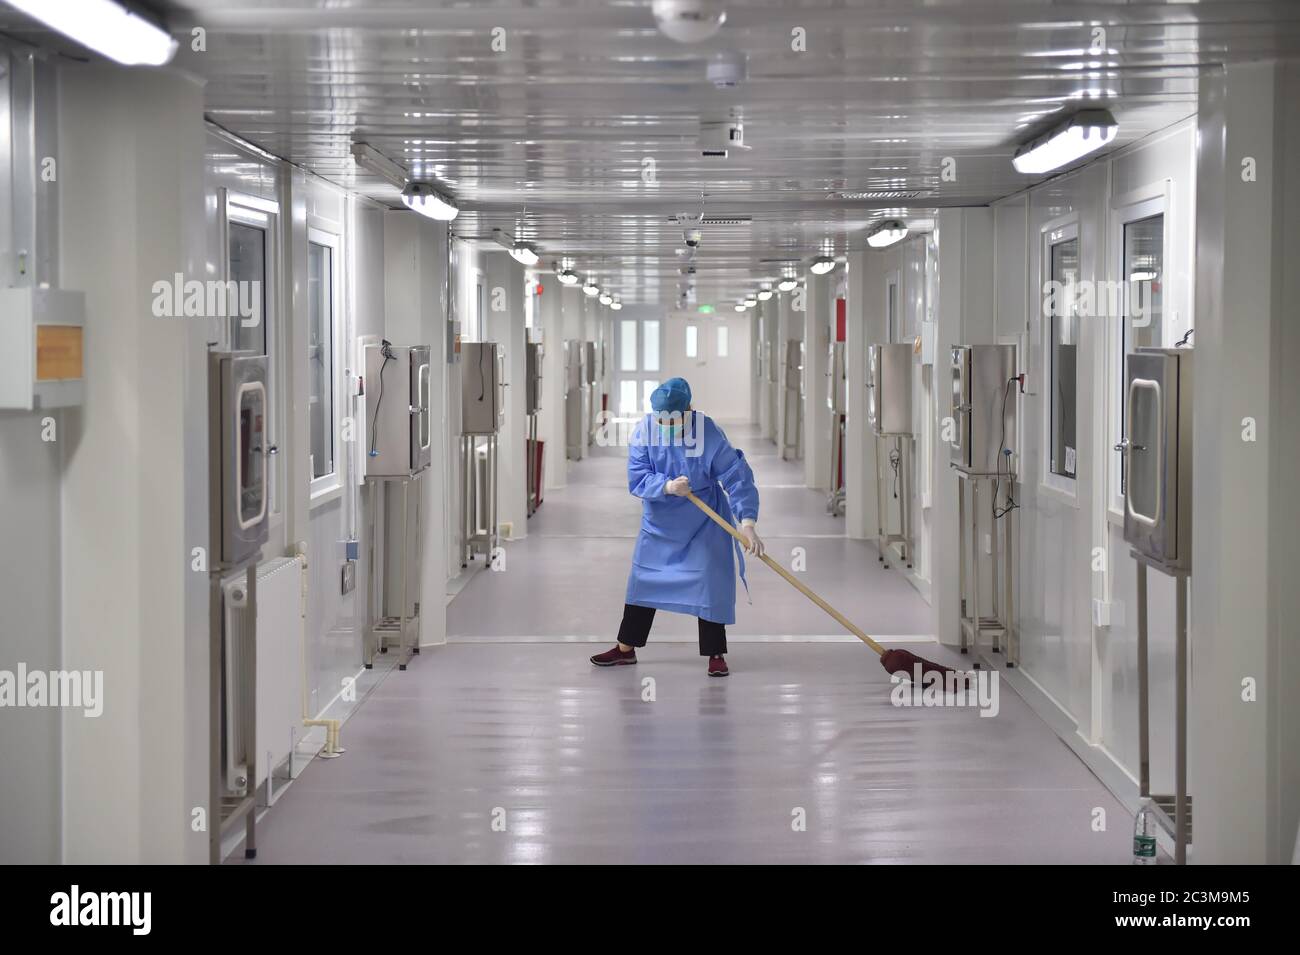 Beijing, China. 19th June, 2020. A staff member cleans the corridor outside the isolation wards at Ditan Hospital in Beijing, capital of China, June 19, 2020. Beijing reported 227 COVID-19 cases on June 11-20. Credit: Peng Ziyang/Xinhua/Alamy Live News Stock Photo